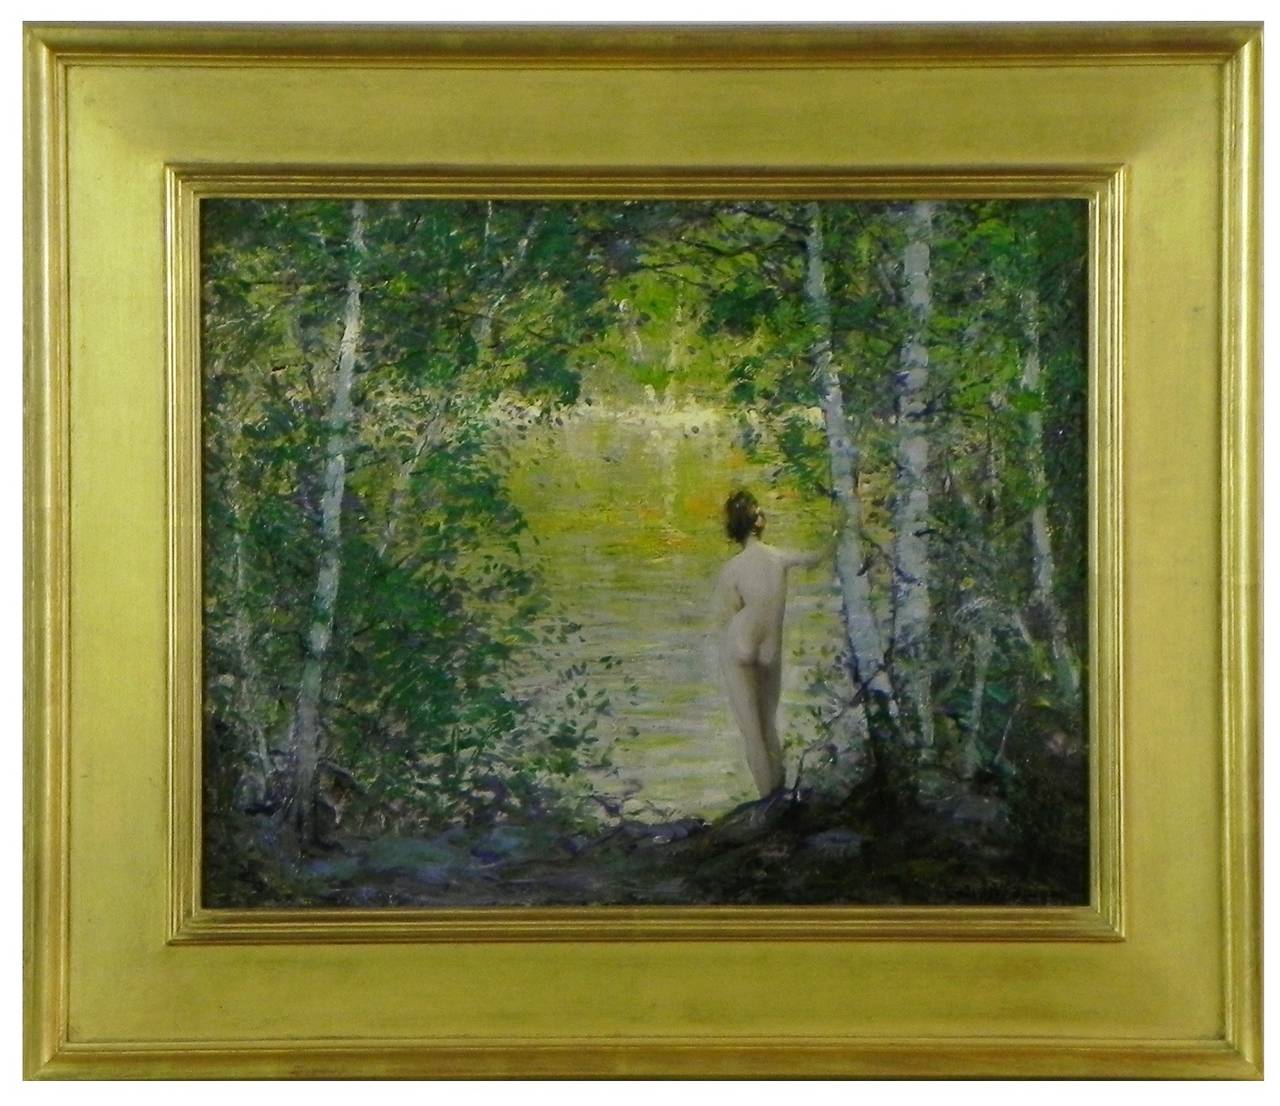 A wonderful example of American Impressionism by renowned New England landscape painter, Emile Gruppe (1896-1978). This is one of his earlier works of a nude by a woodland pond, showcasing Gruppe's talent for moving the observer's eye from